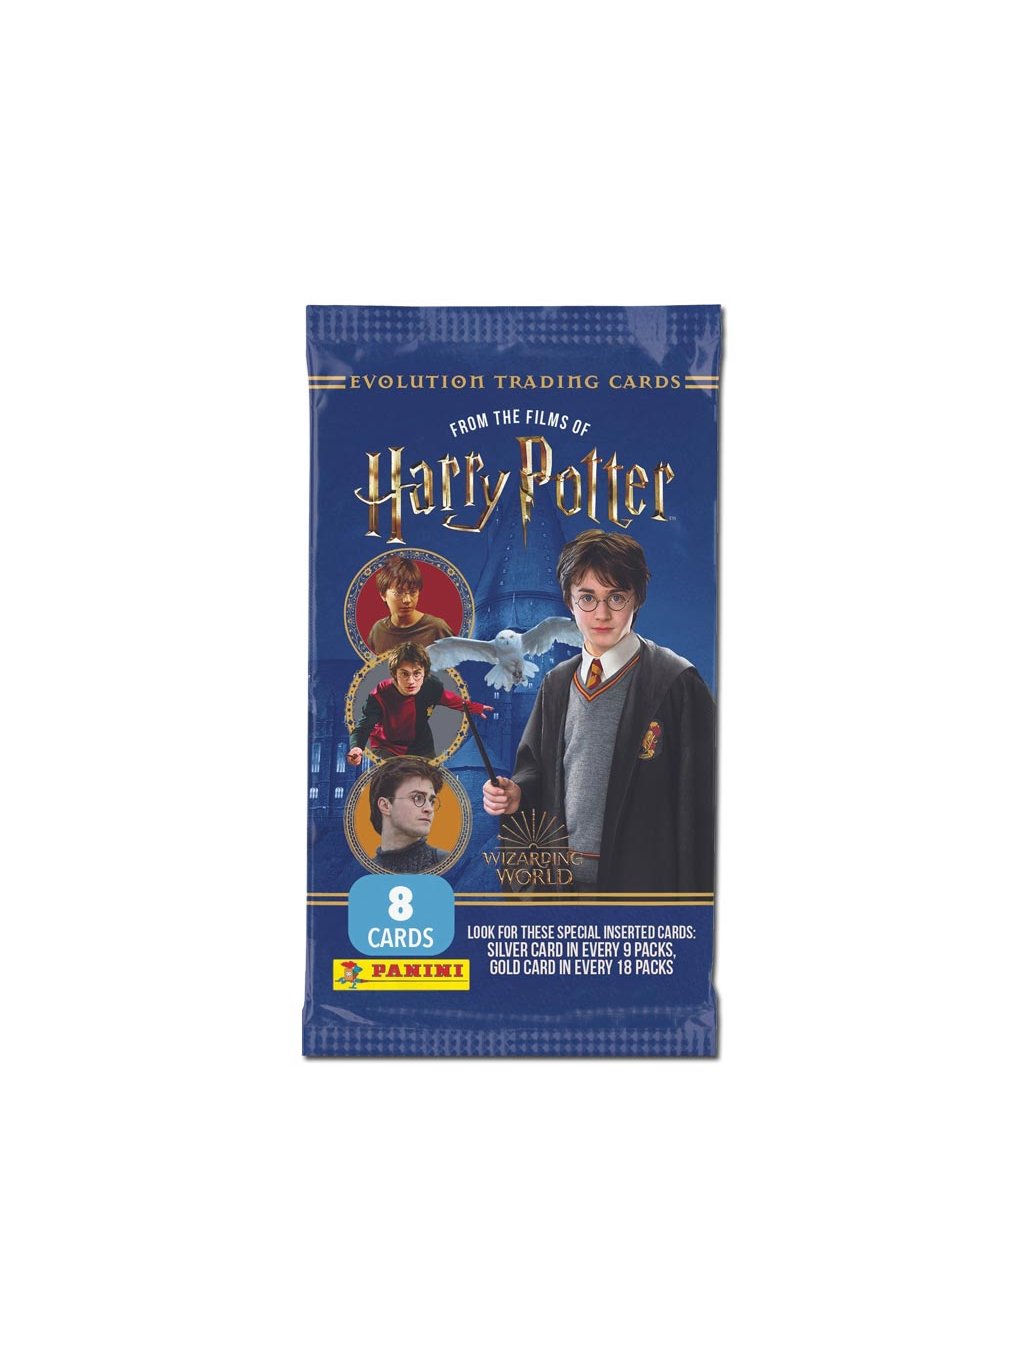 panini harry potter evolution trading cards booster pack